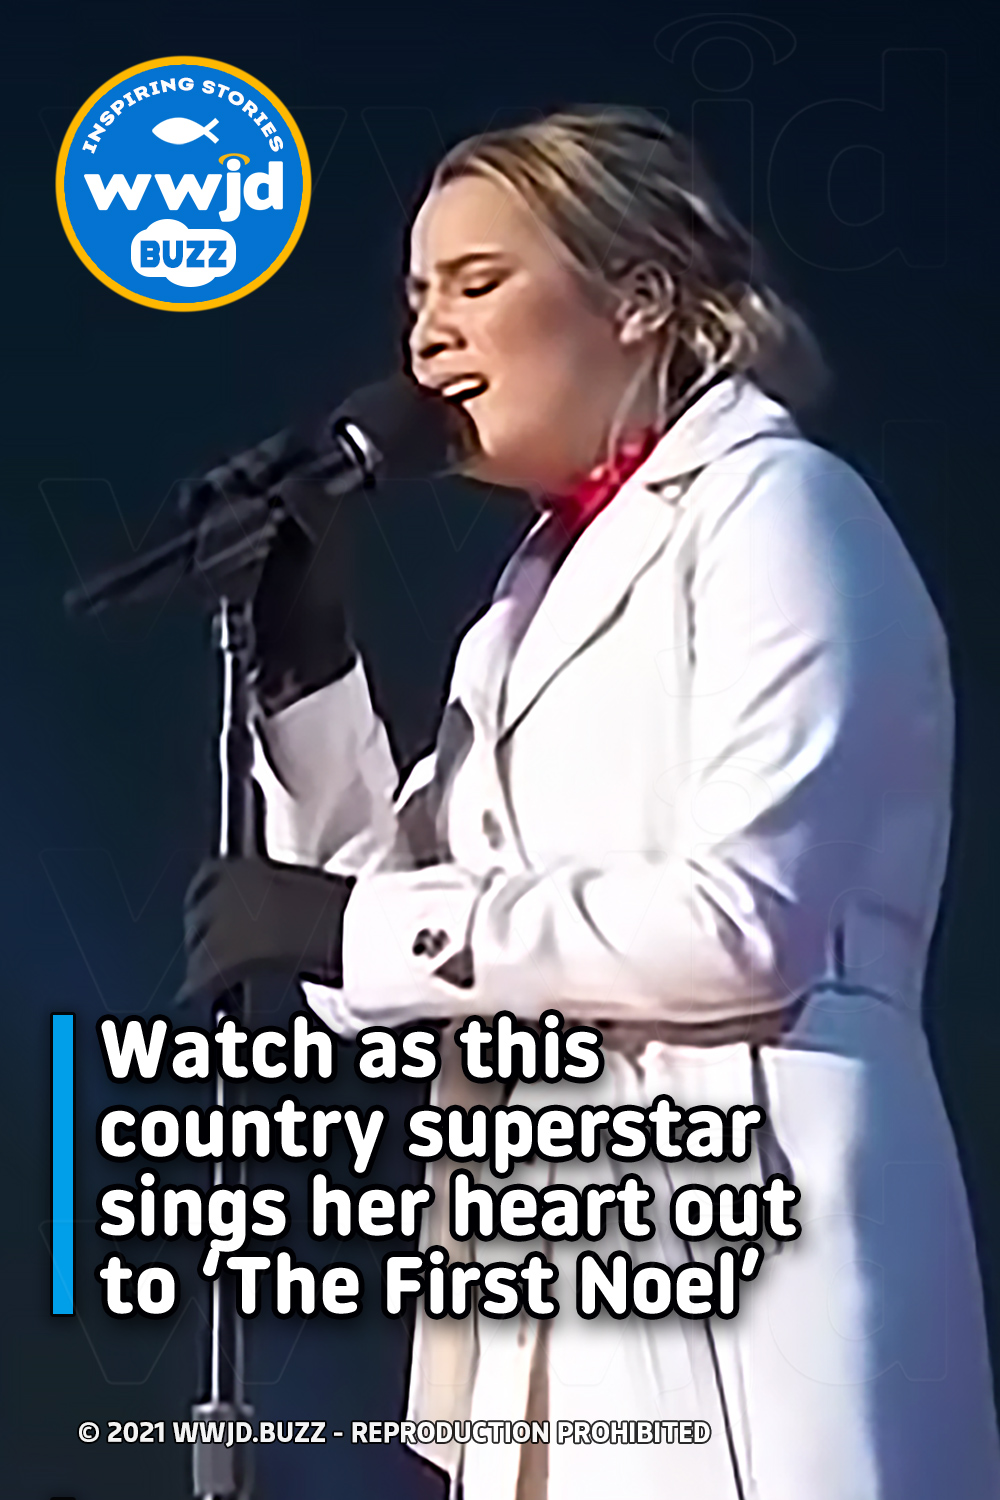 Watch as this country superstar sings her heart out to ‘The First Noel’